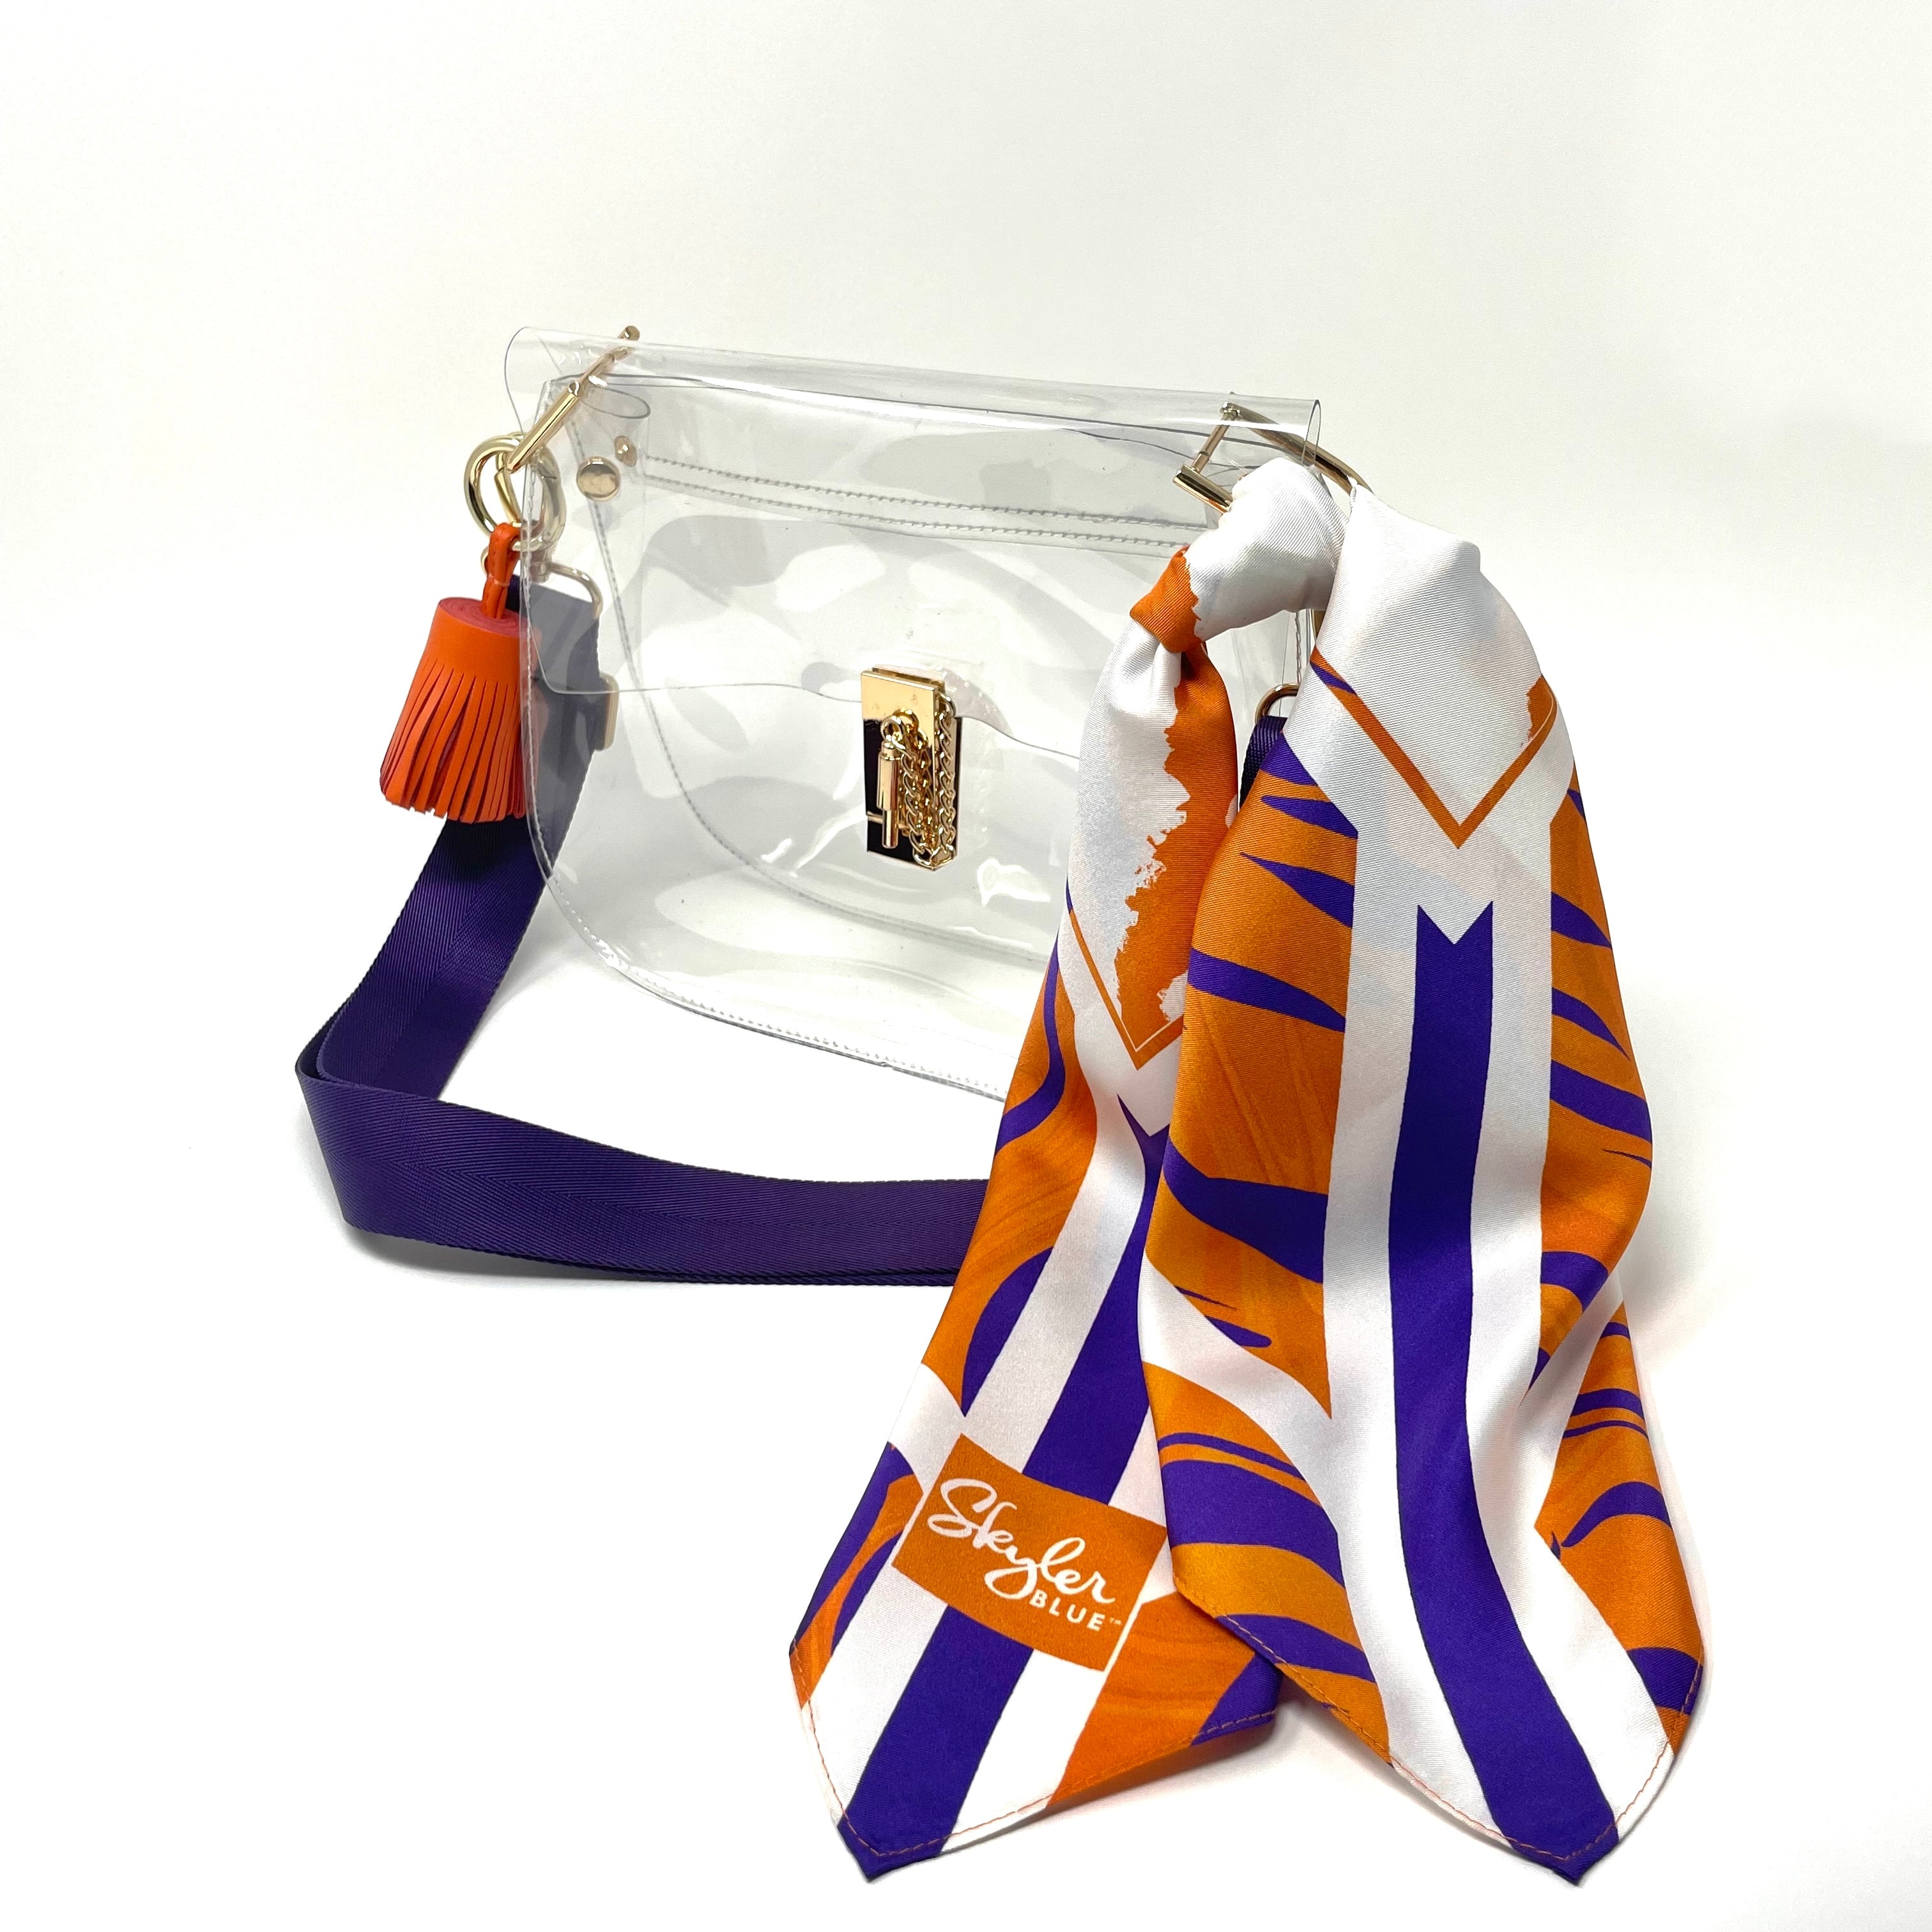 Skyler Blue’s The Howard Medium Saddle Clear Bag stadium approved clear bag / clear purse including adjustable, nylon webbing shoulder or crossbody strap with herringbone weave and gold hardware, 60-centimeter 100% silk twill scarf, and 100% genuine leather tassel. 